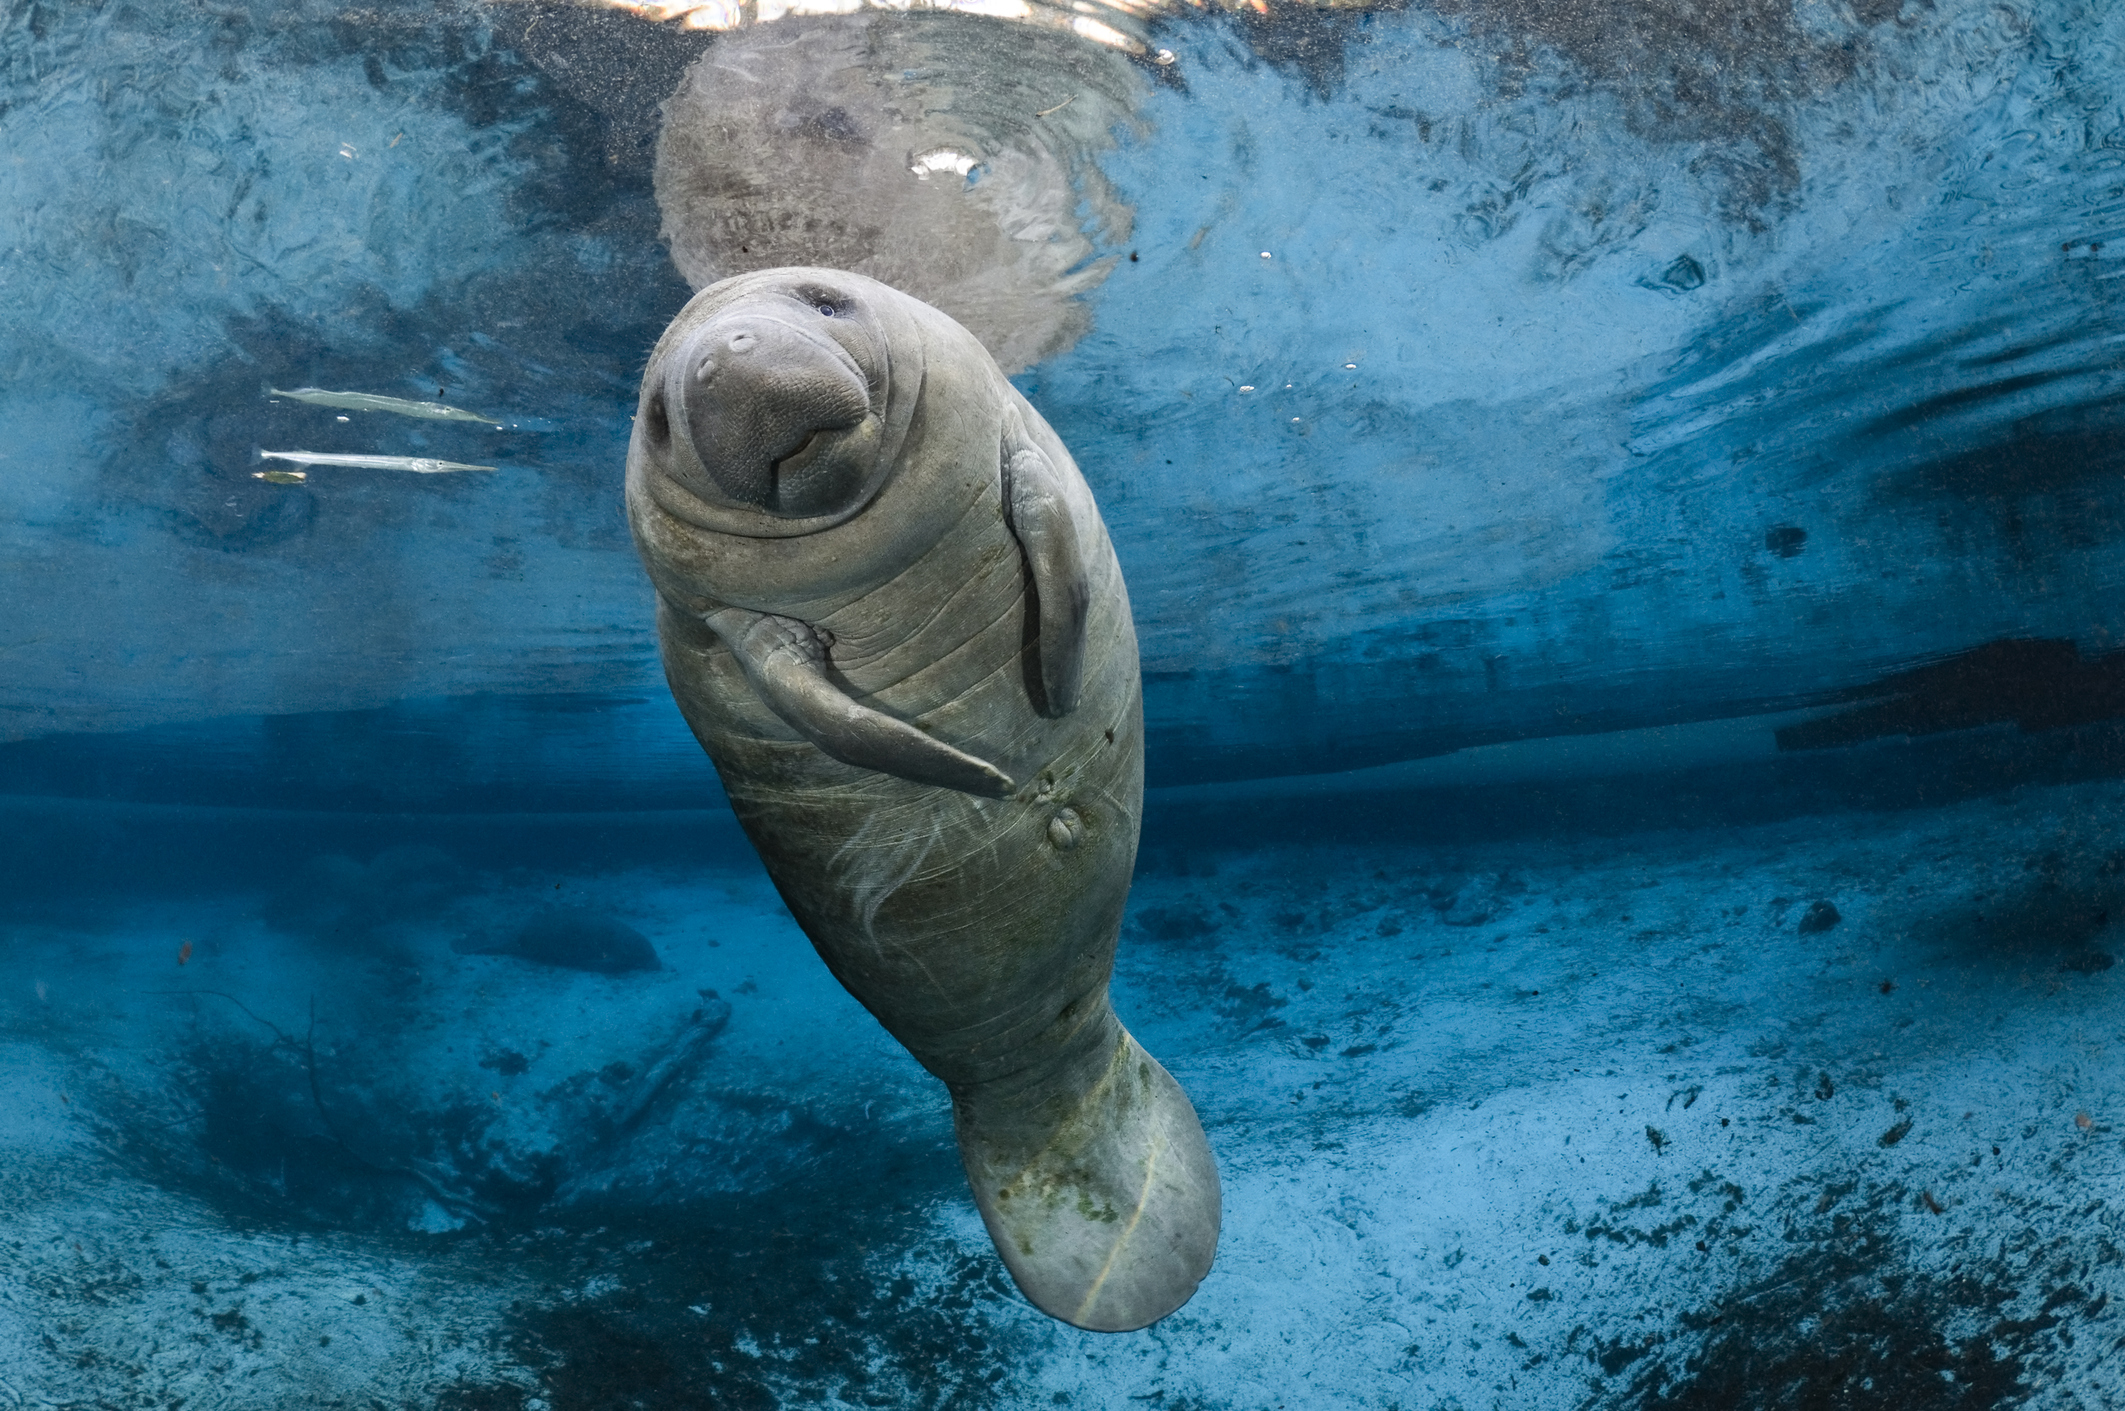 On one of the coldest Florida winter days in history, a young male Florida manatee calf floats and enjoys the warmth over a blue freshwater spring outflow. (Carol Grant—Getty Images)